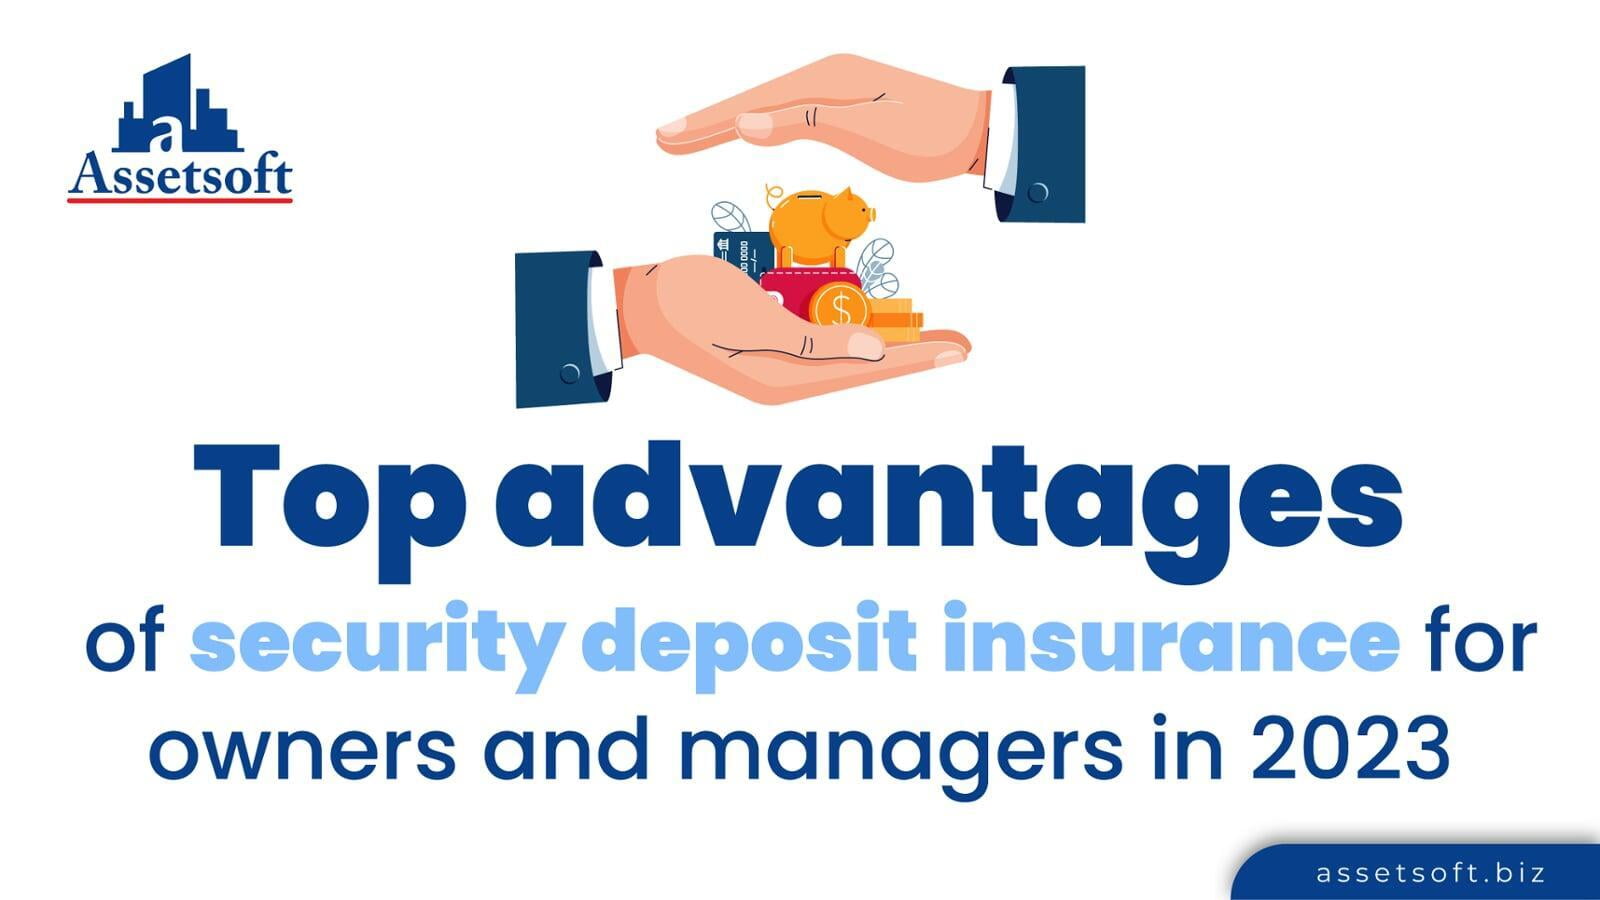 Top Advantages of Security Deposit Insurance for Owners and Managers in 2023 